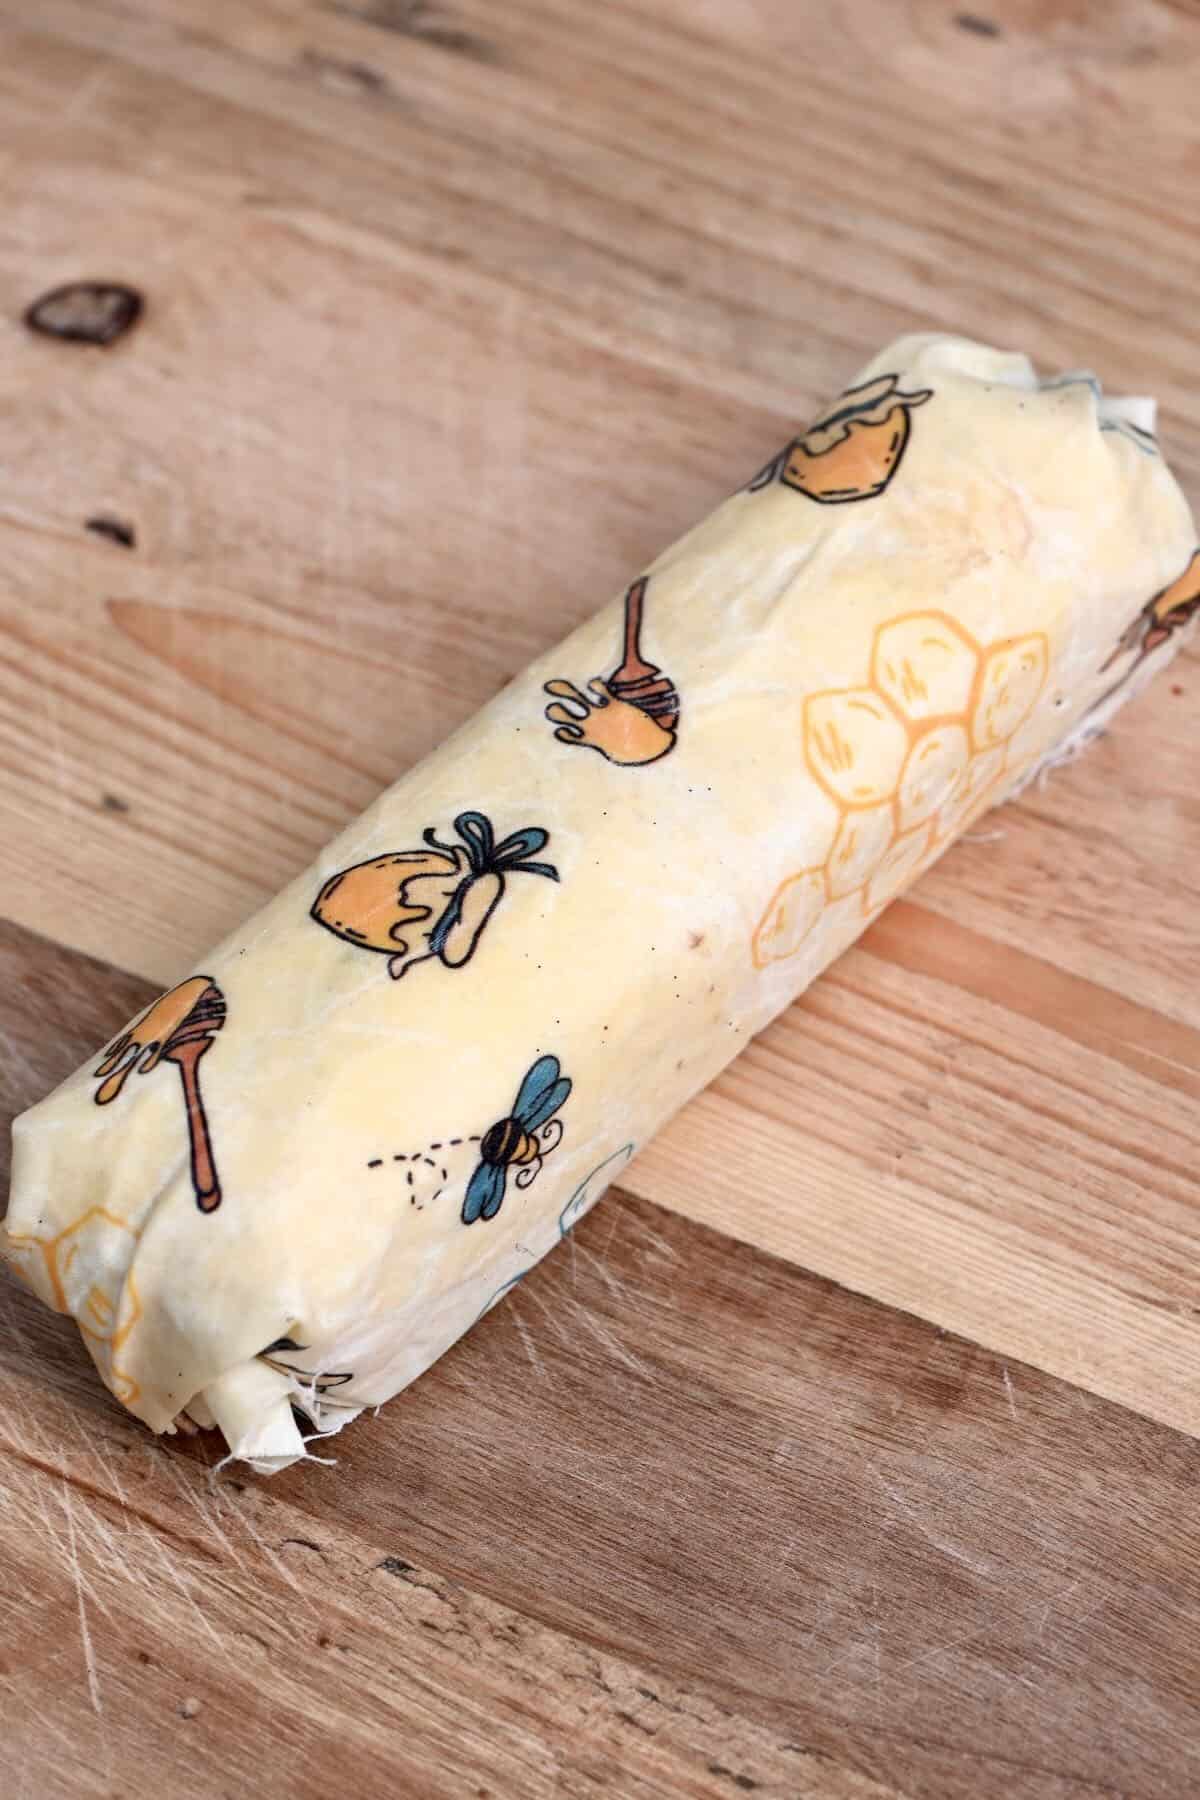 Butter rolled into a log